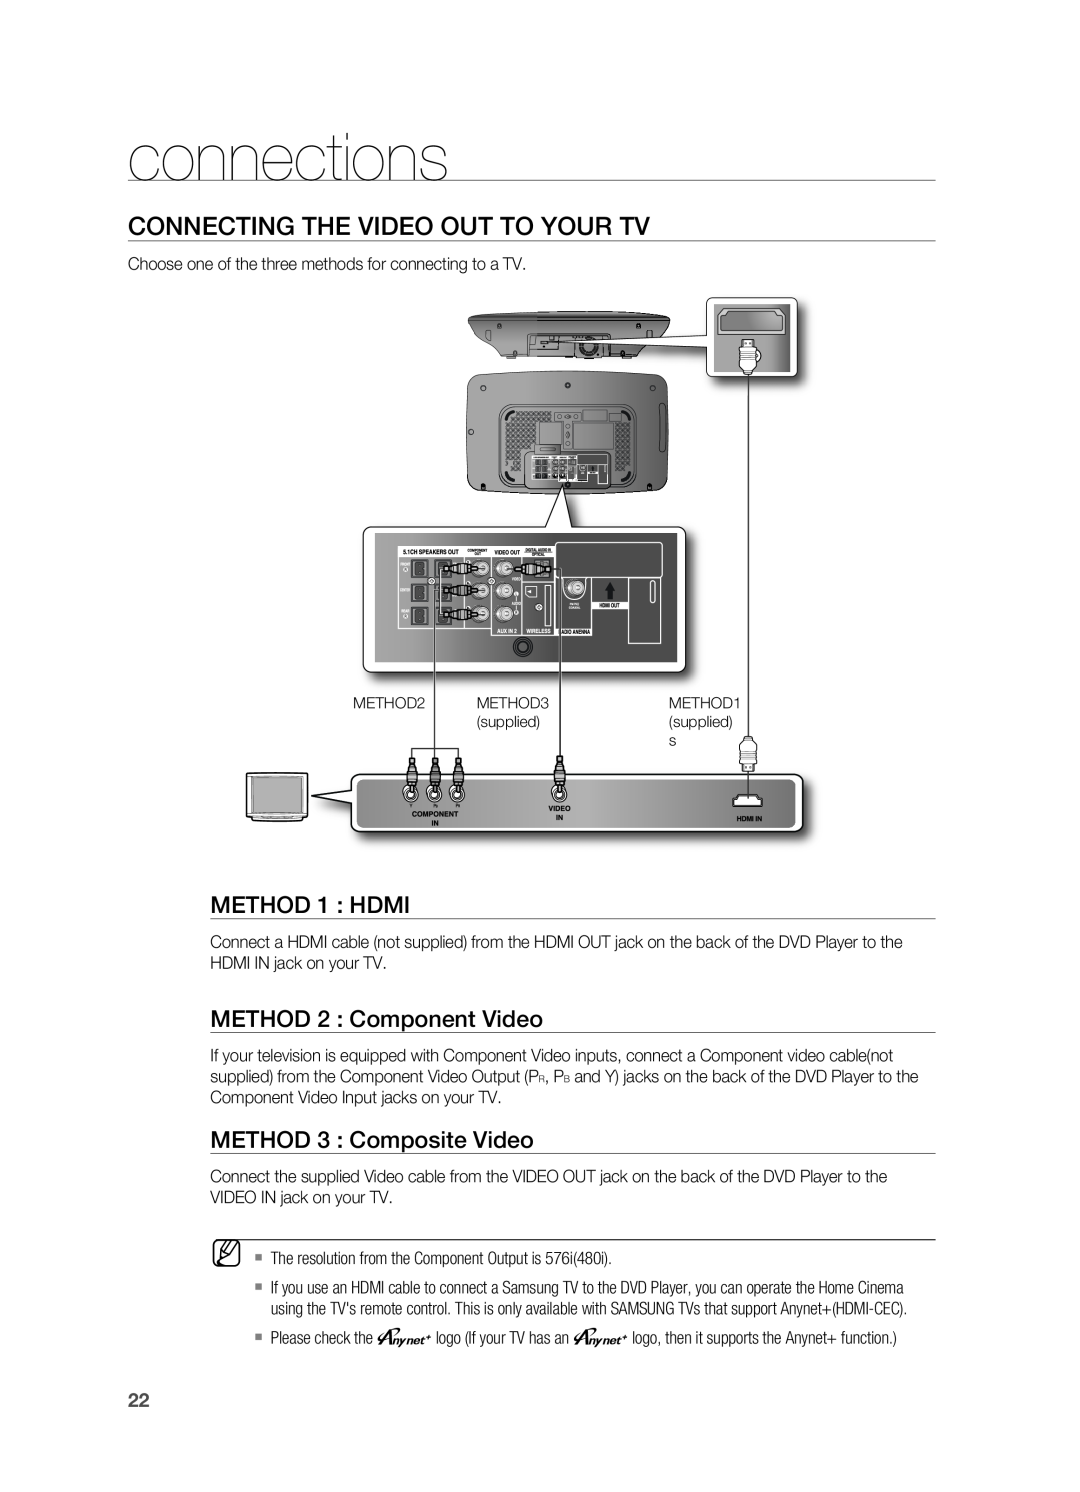 Samsung HT-TX715 user manual CONNECTING THE VIDEO OUT TO YOUr TV, connections, METHOD 1 HDMI, METHOD 2 Component Video 